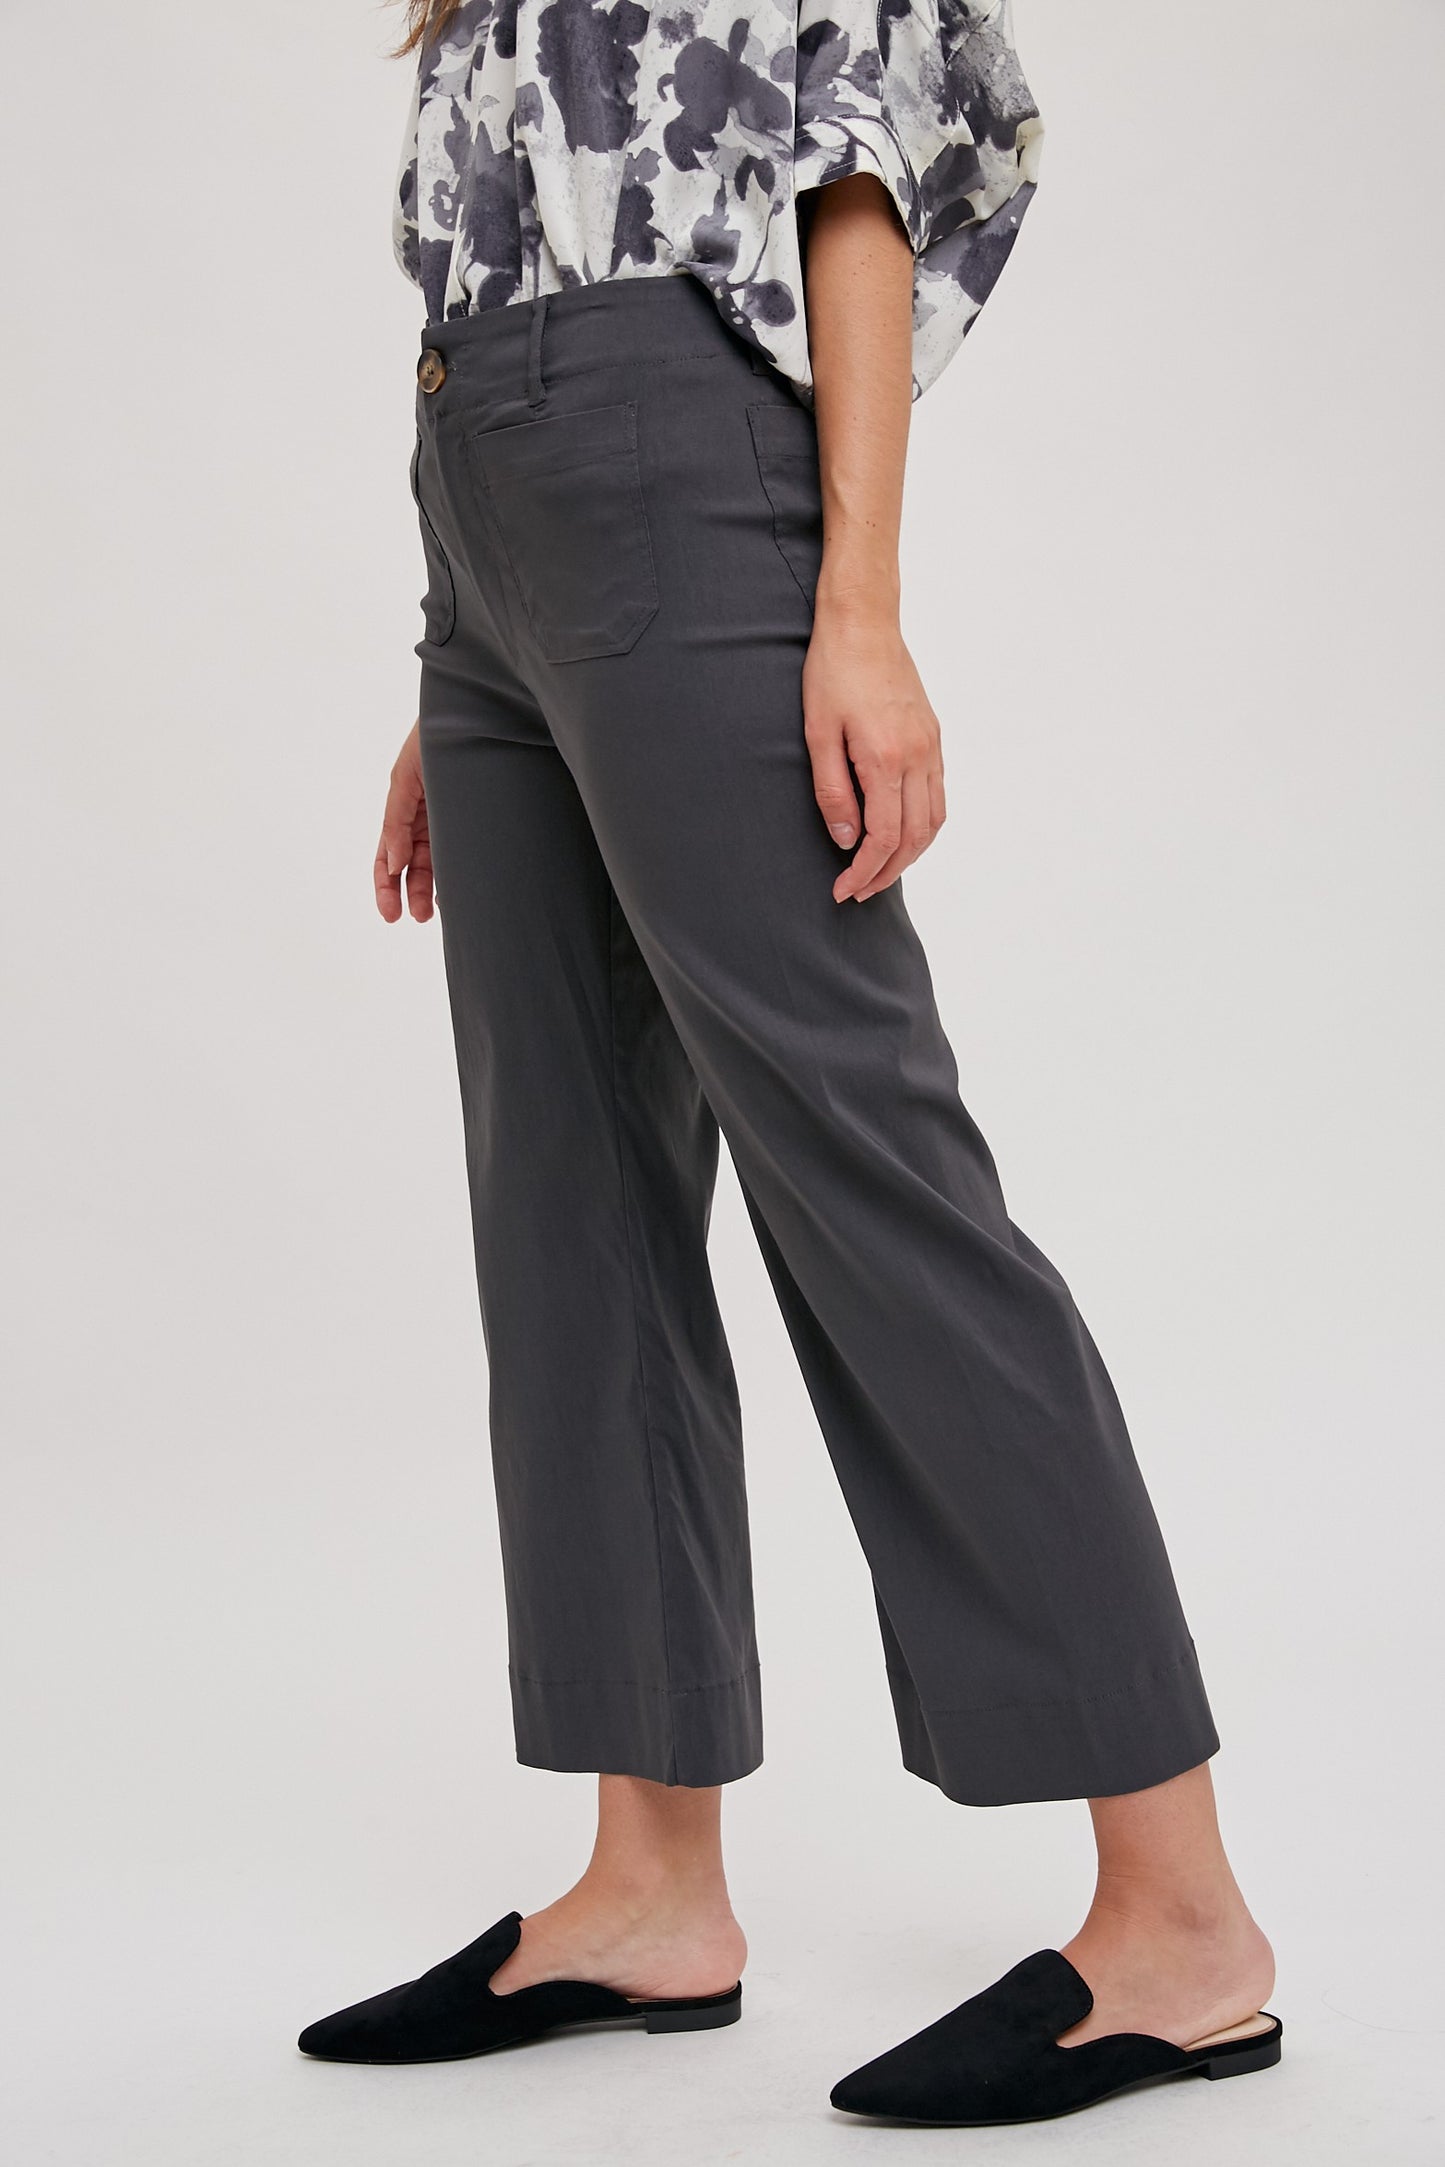 The Becca Pants in Charcoal